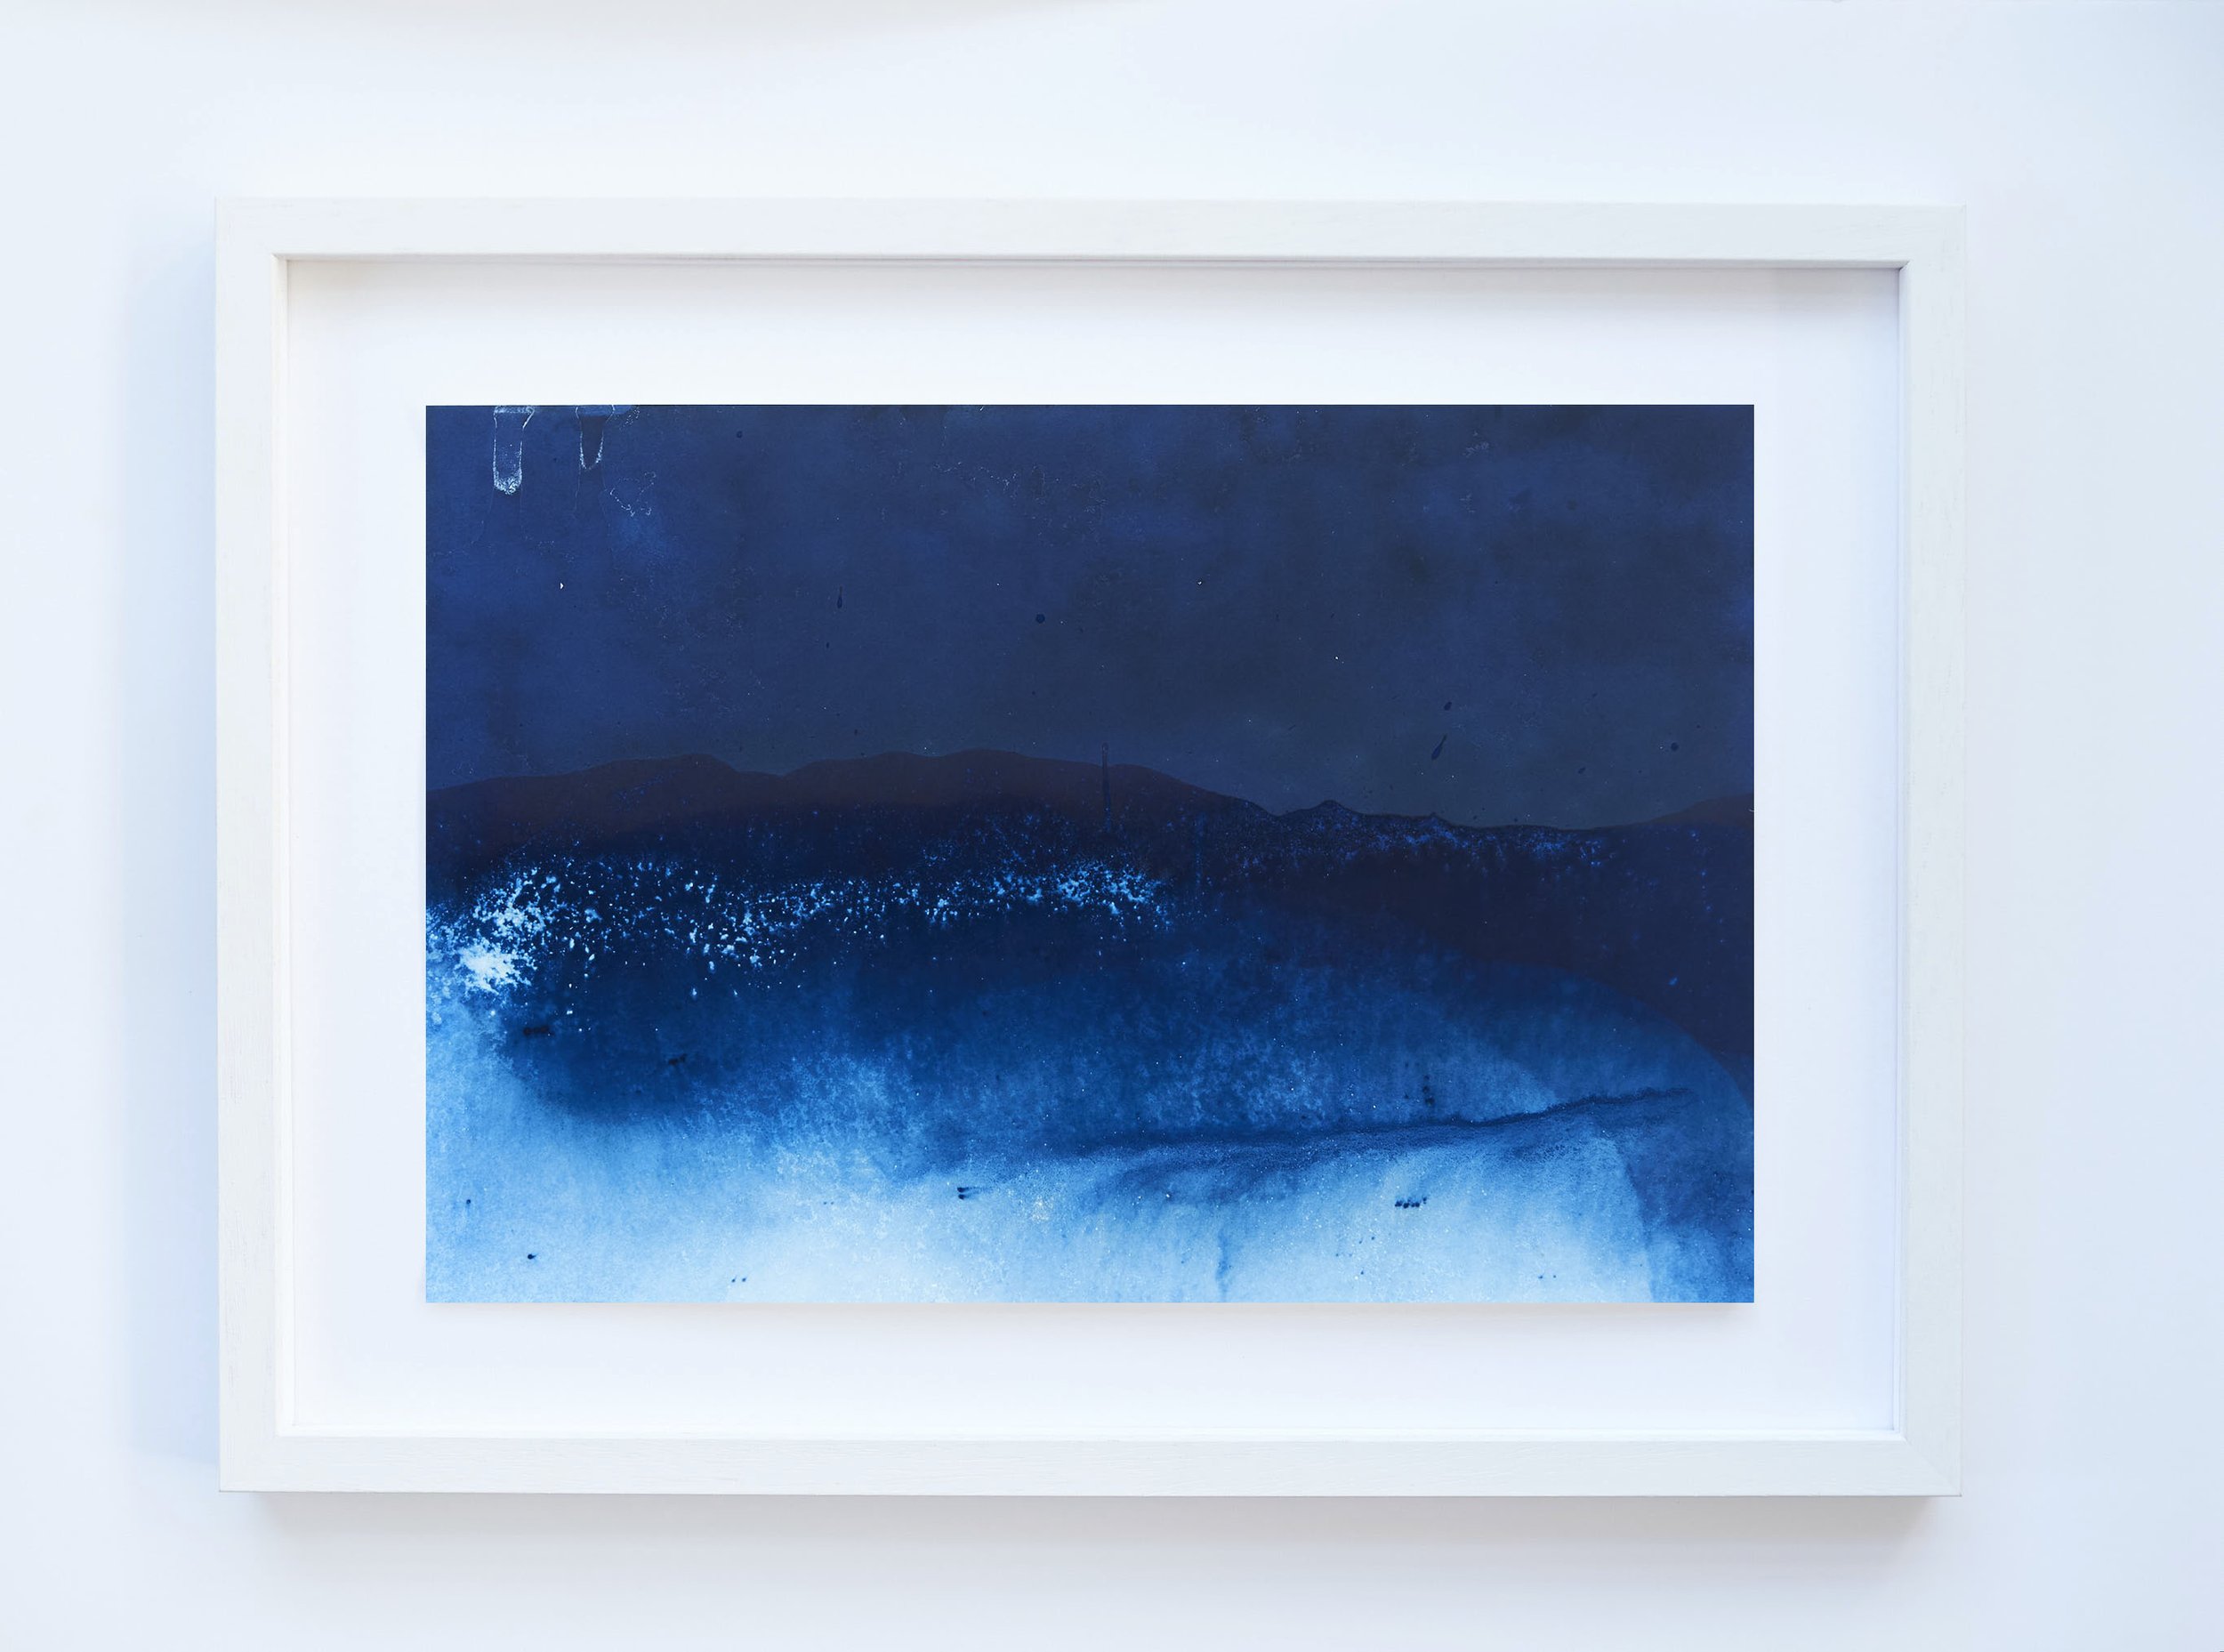  IL-Mainporth-2020-012 Cyanotype on paper  Print 12x18in  Framed 17x23in 